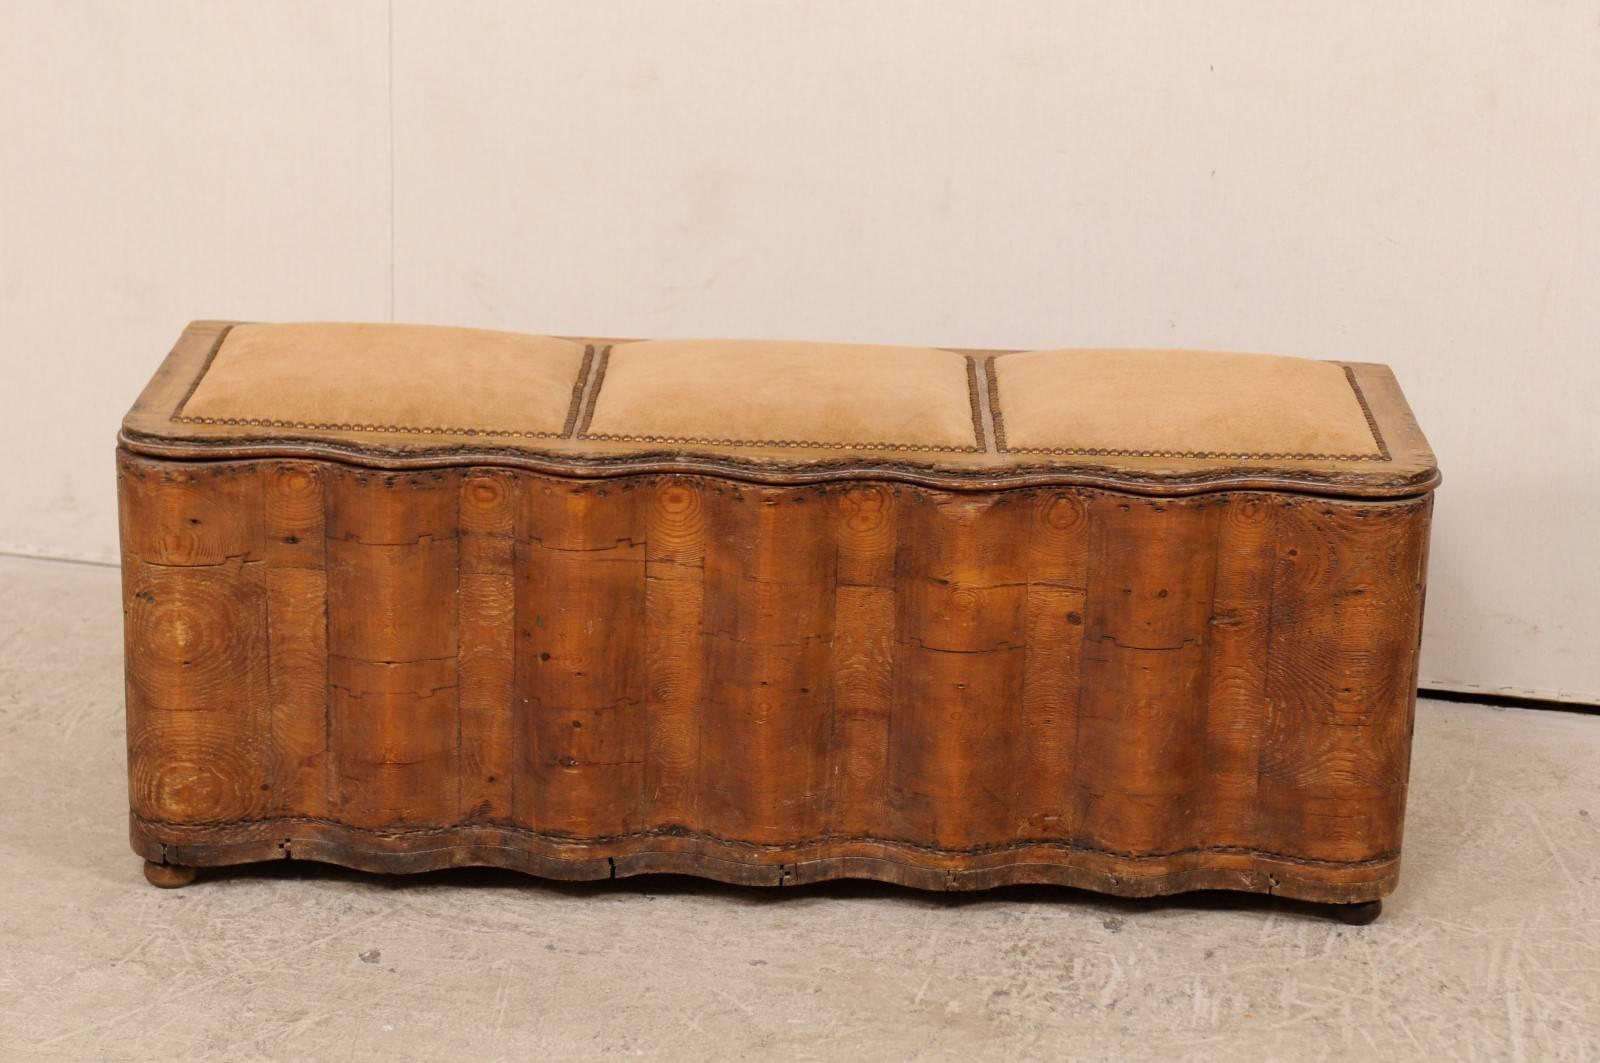 An early 19th century Italian wood bench with storage. This antique Italian bench features a beautifully undulating wood front of vertically carved waves with rounded corners, and plain sides and rear. The top bench seat is suede with nailhead